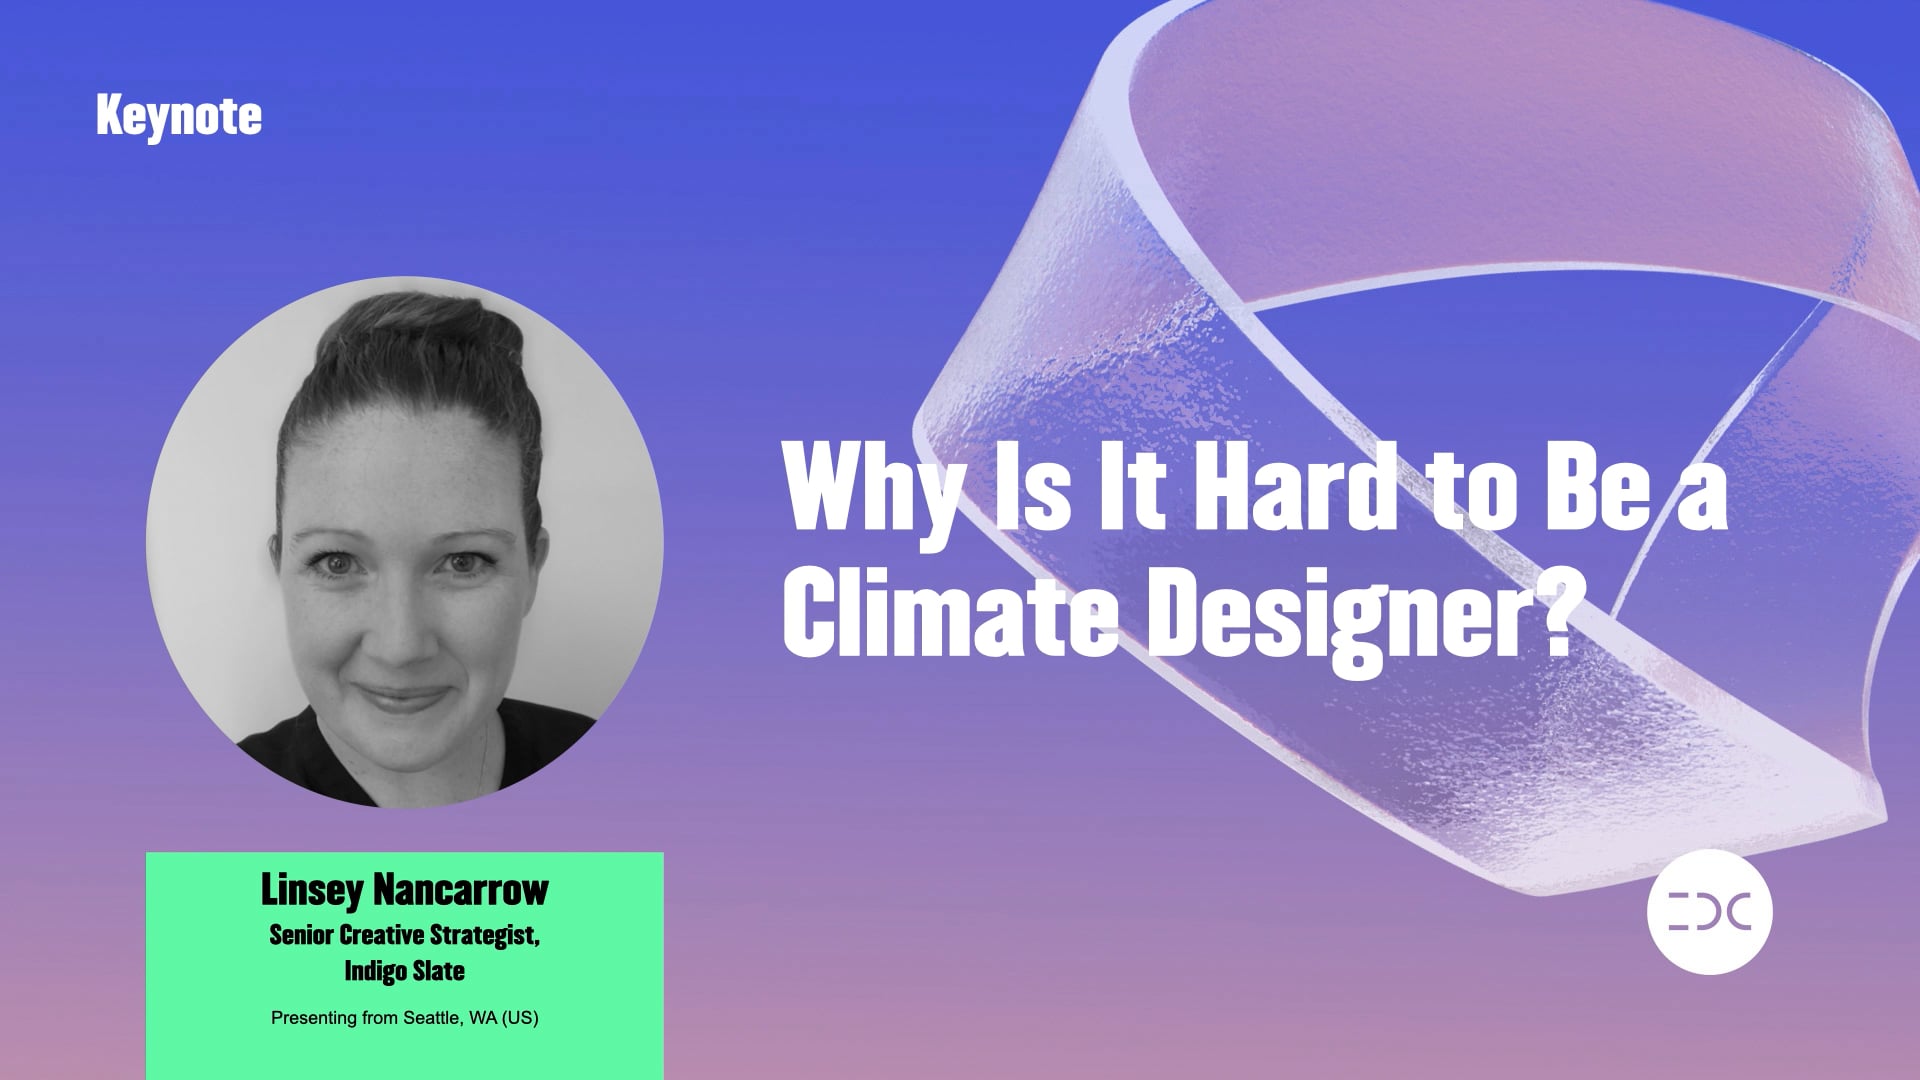 IDC 2021 - Linsey Nancarrow - Why Is It Hard to Be a Climate Designer?